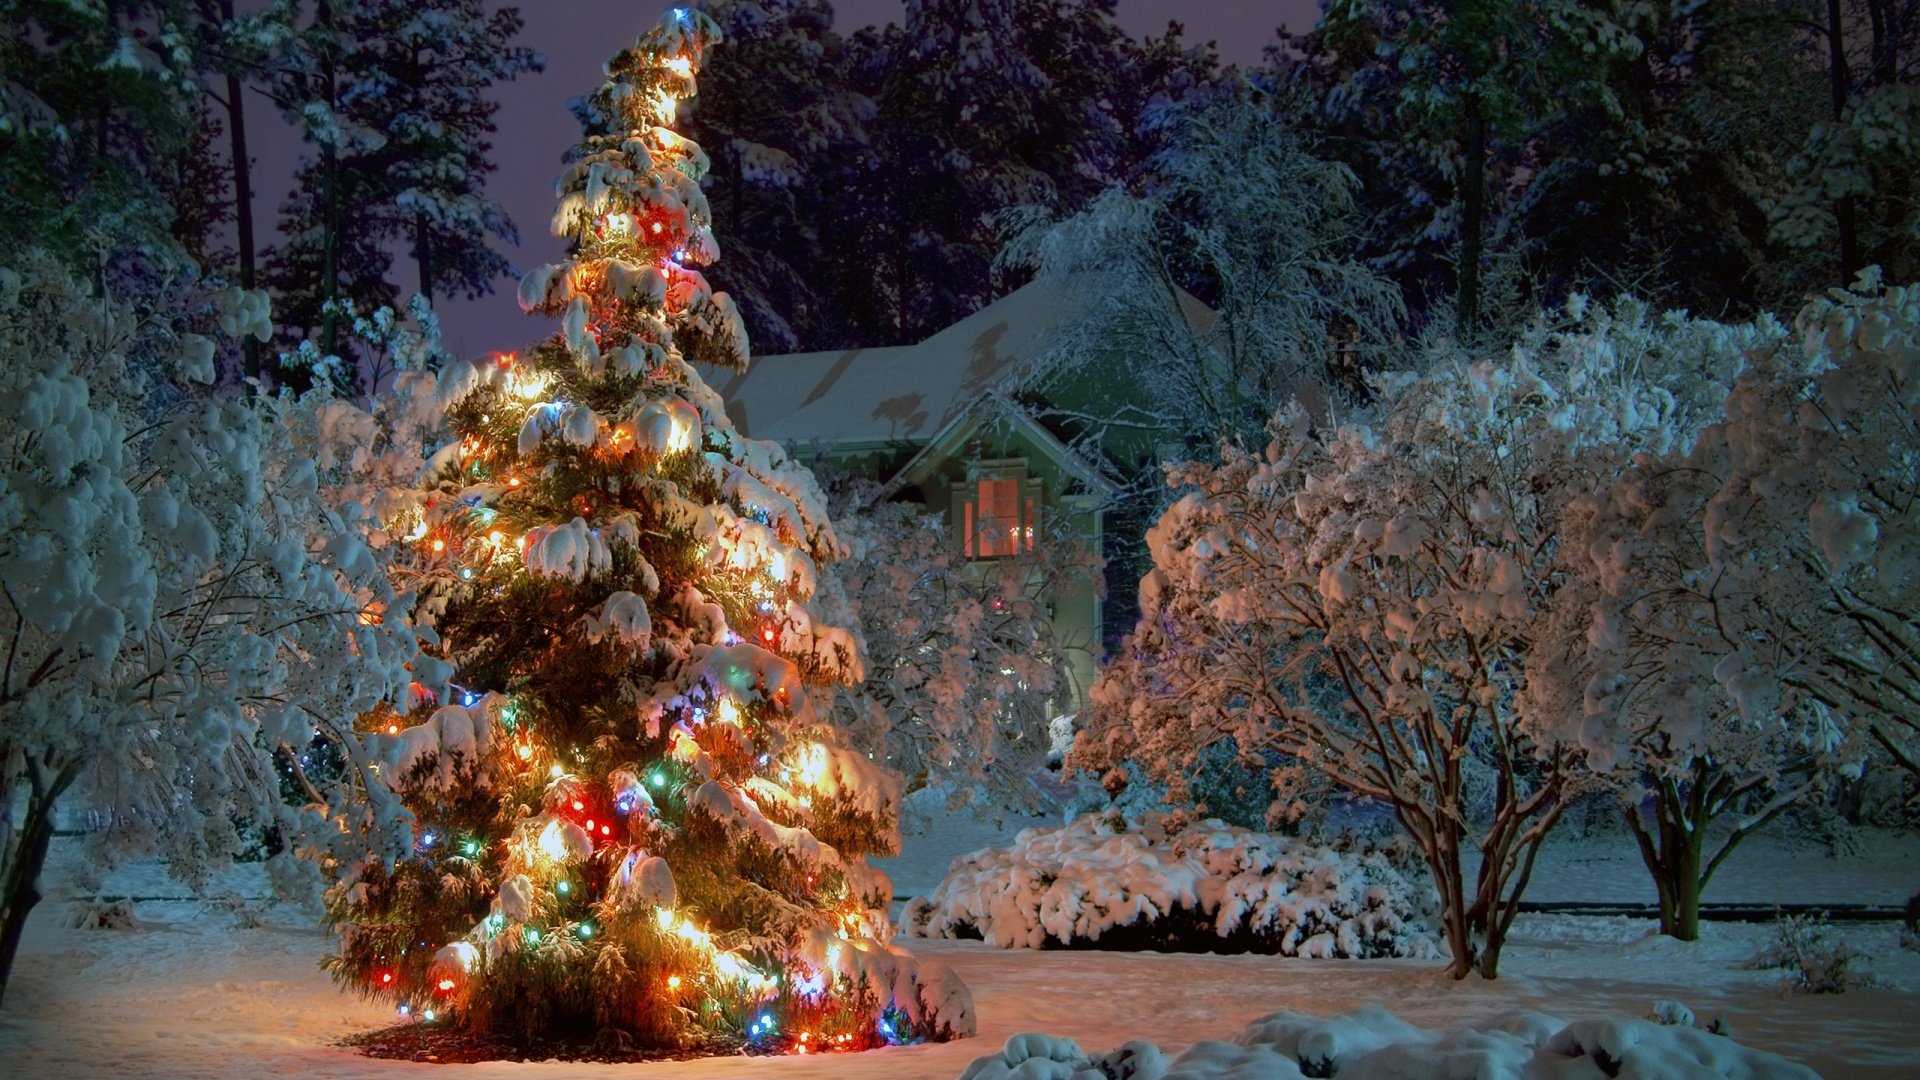 1920x1080 Outdoor Christmas Tree Desktop Pc And Mac Wallpaper Pictures